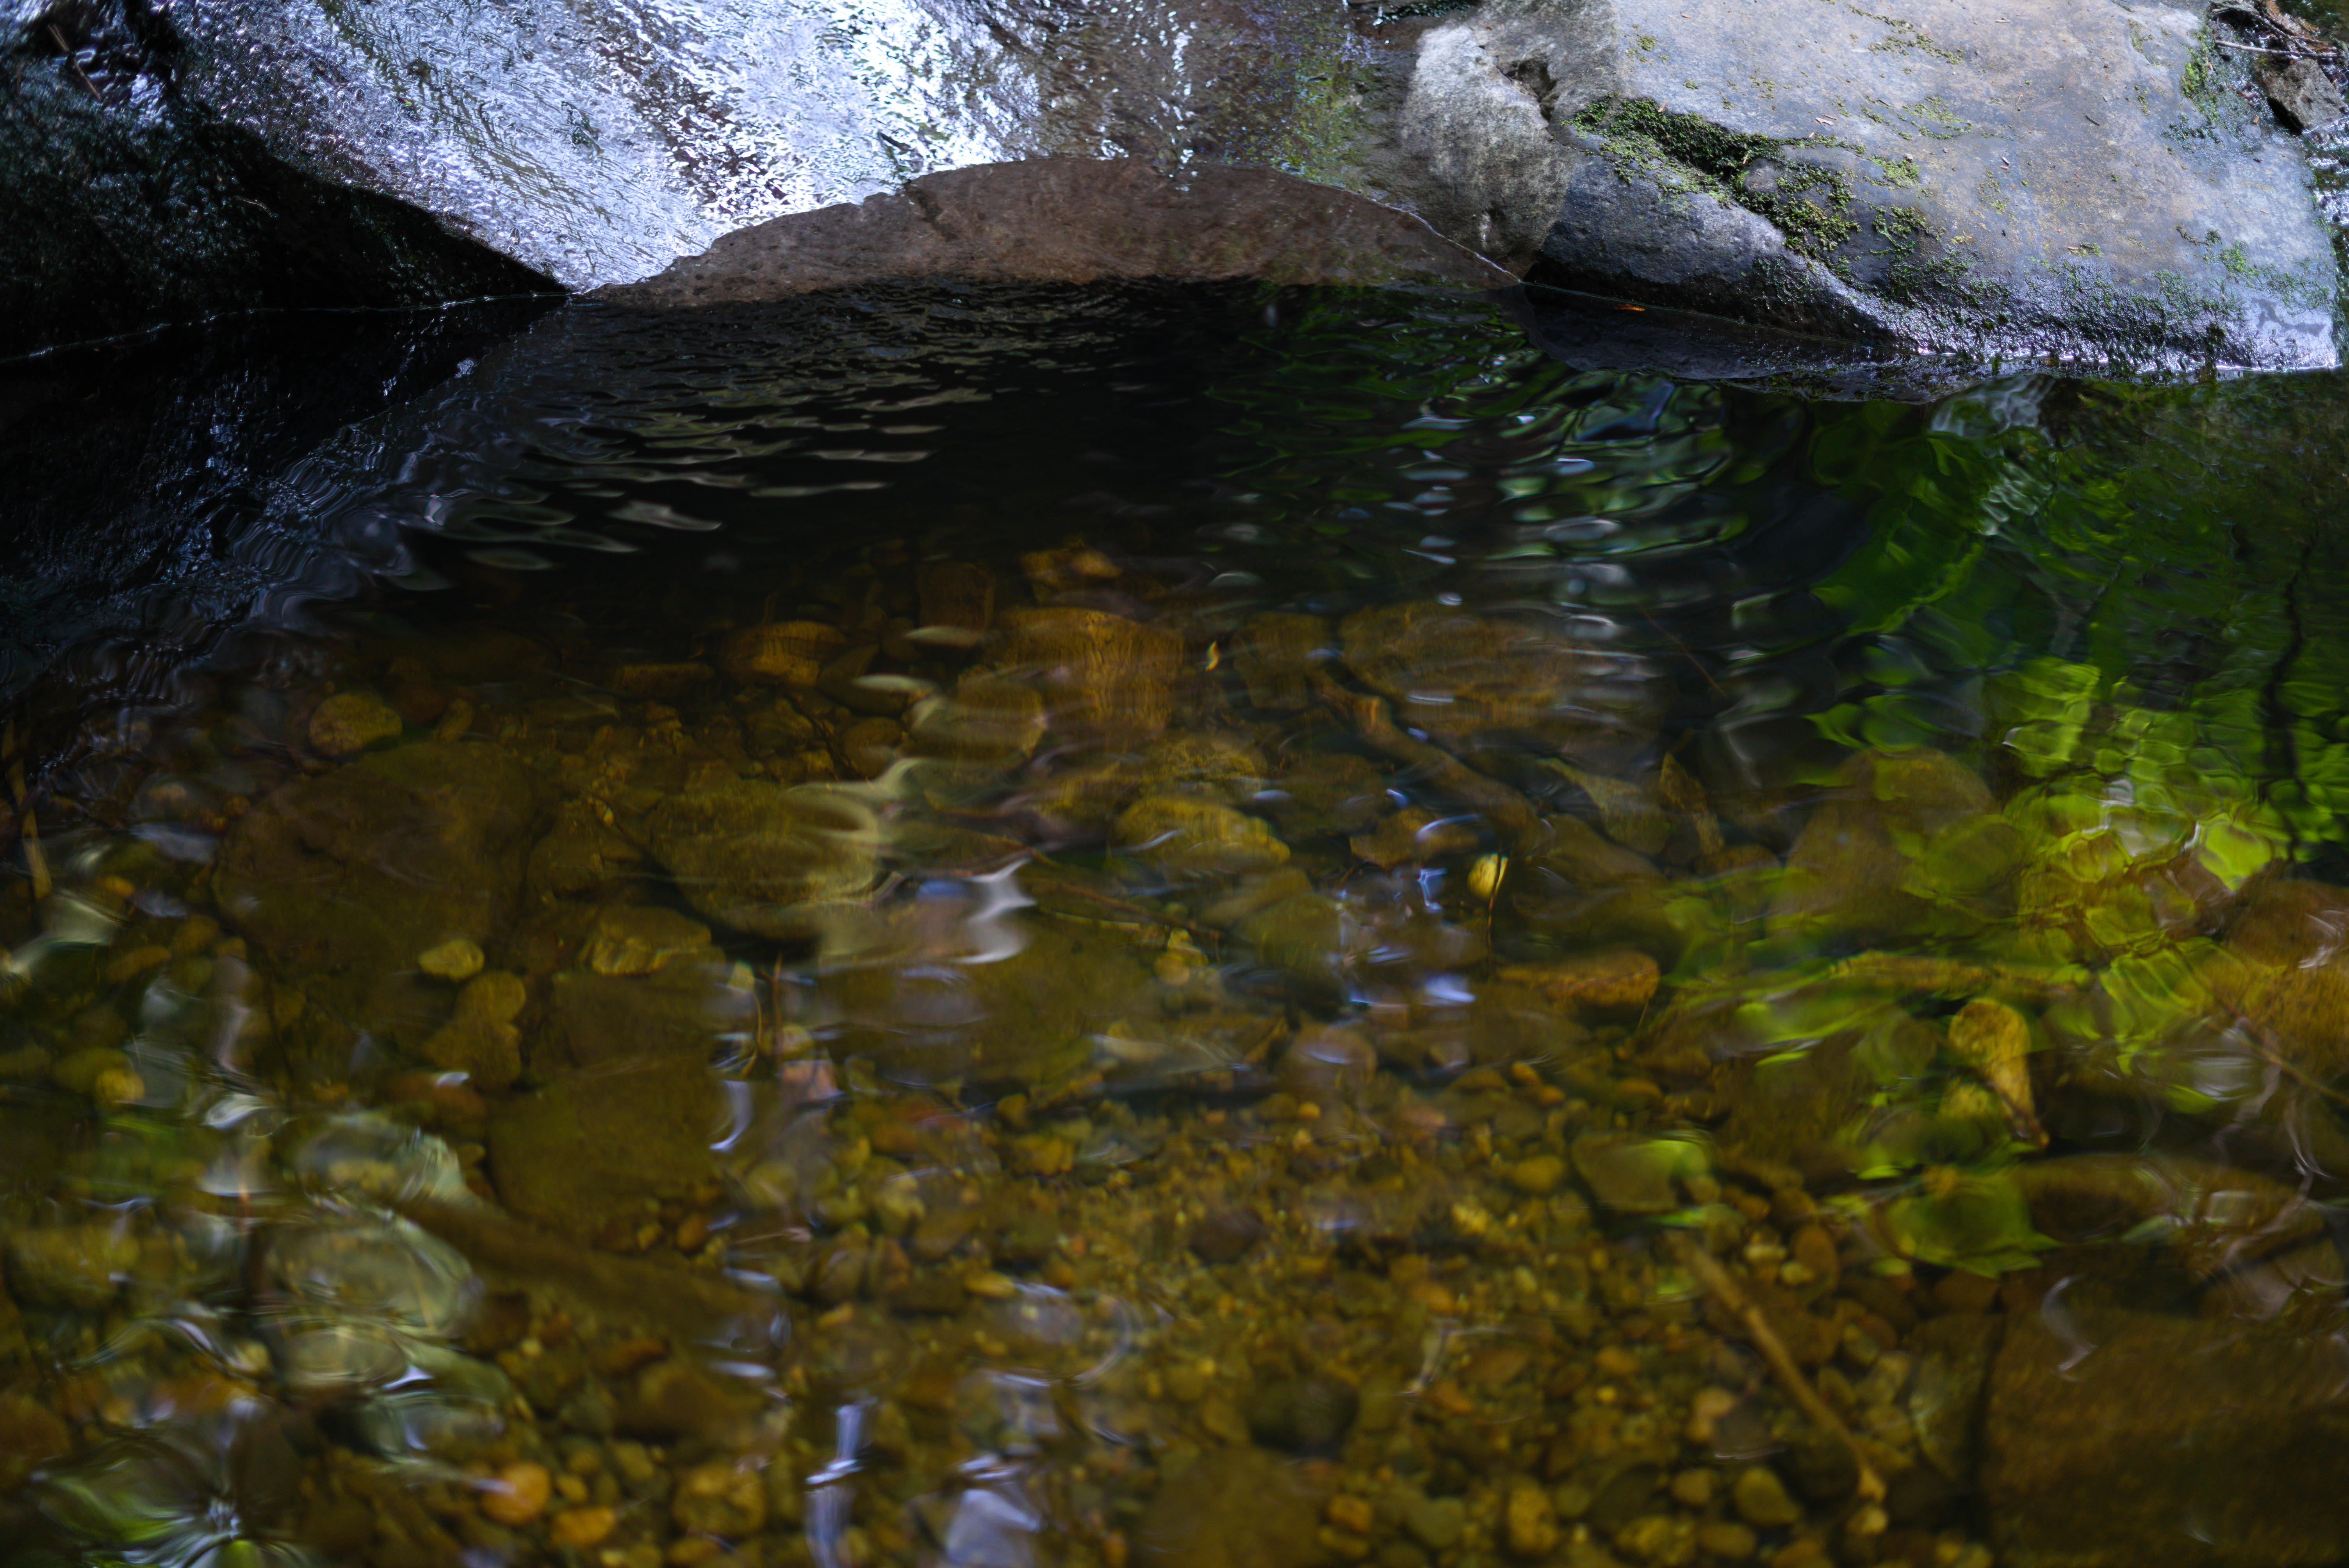 shimmers on the water from a small trickle in a brook